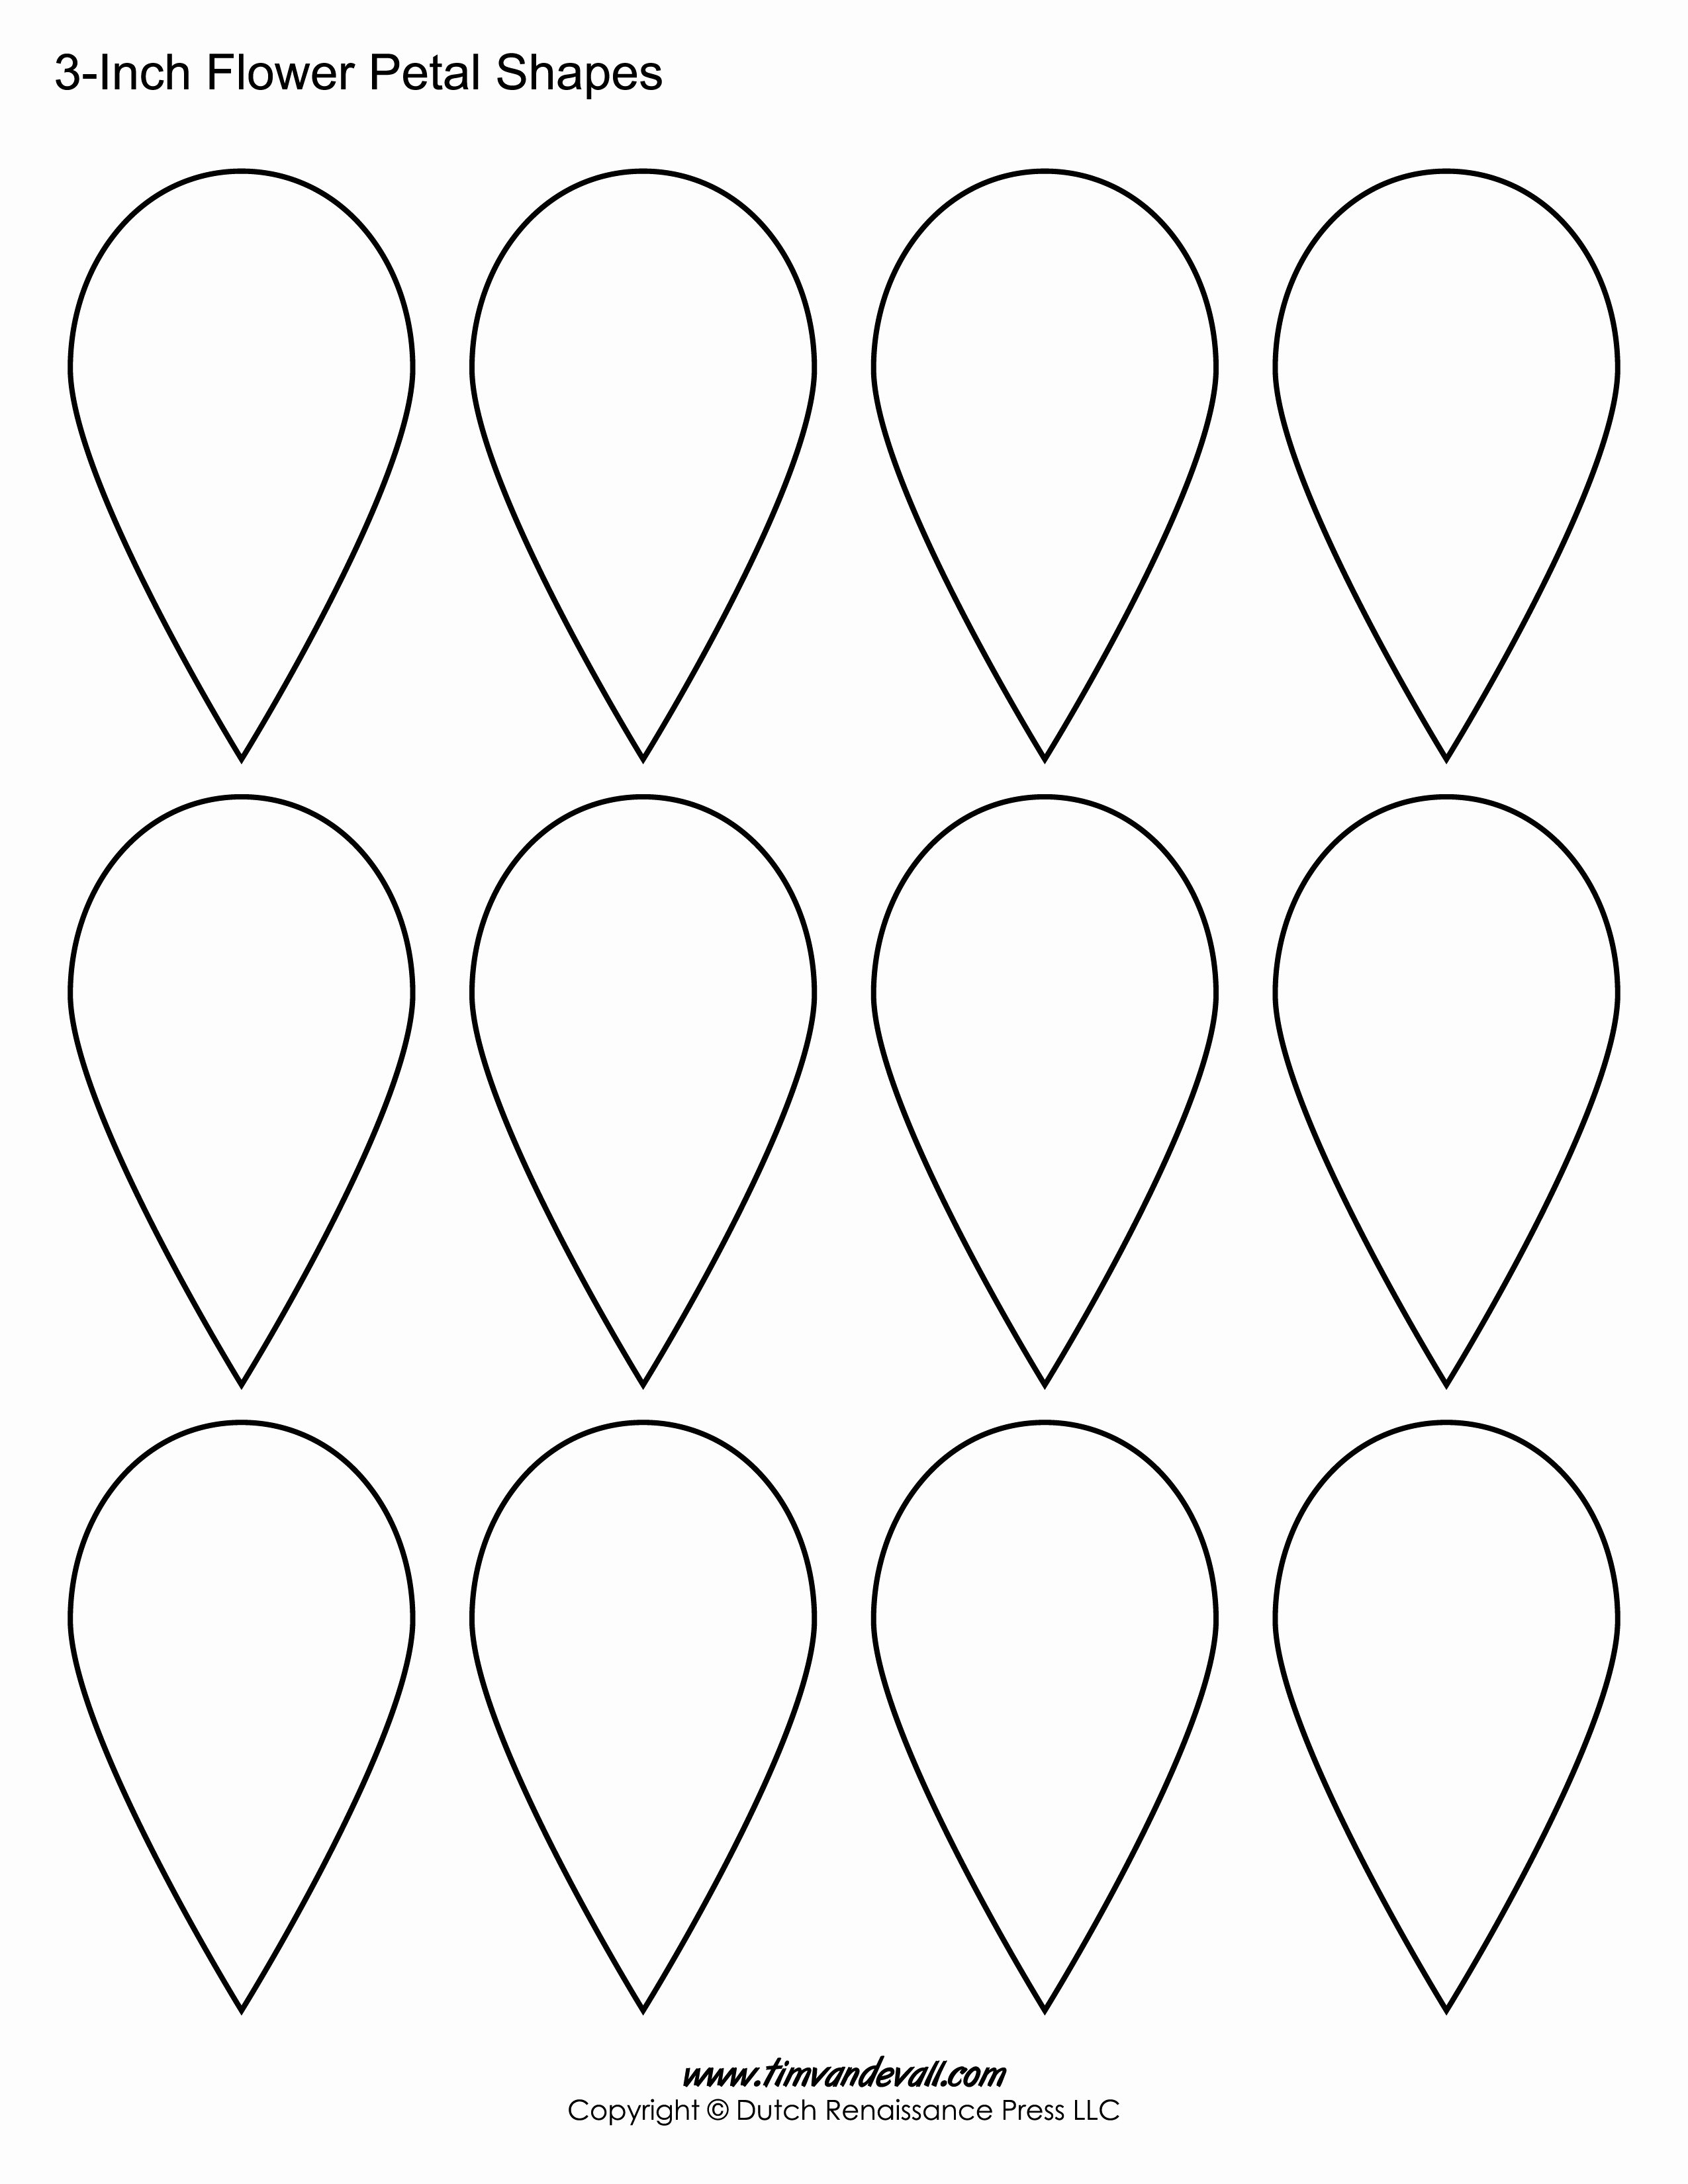 Small Paper Flower Templates Beautiful Printable Flower Petal Templates for Making Paper Flowers